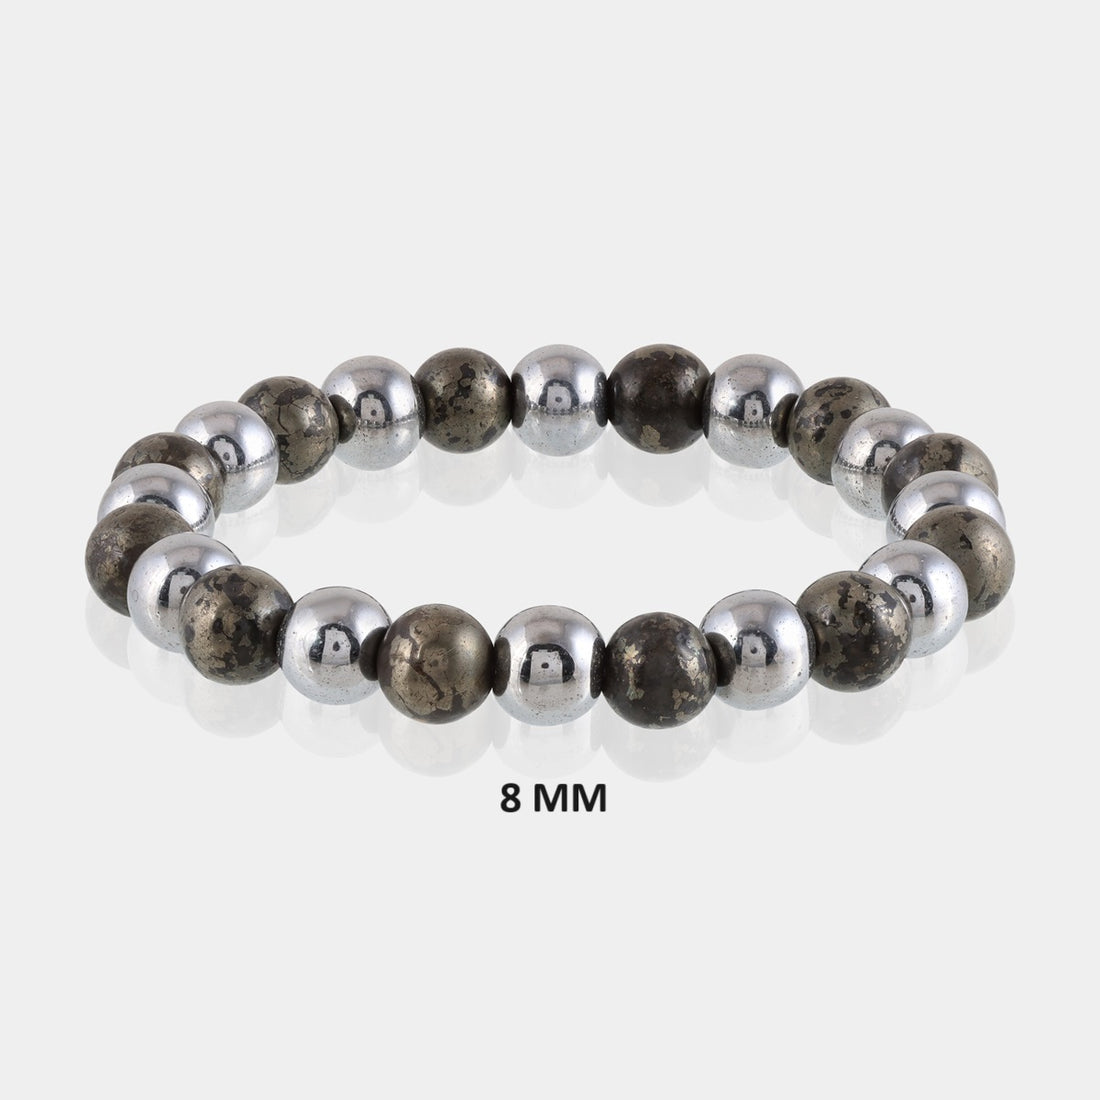 Hematite and Pyrite Bracelet - 8mm beads, grounding, protection, and manifestation energies for enhanced well-being